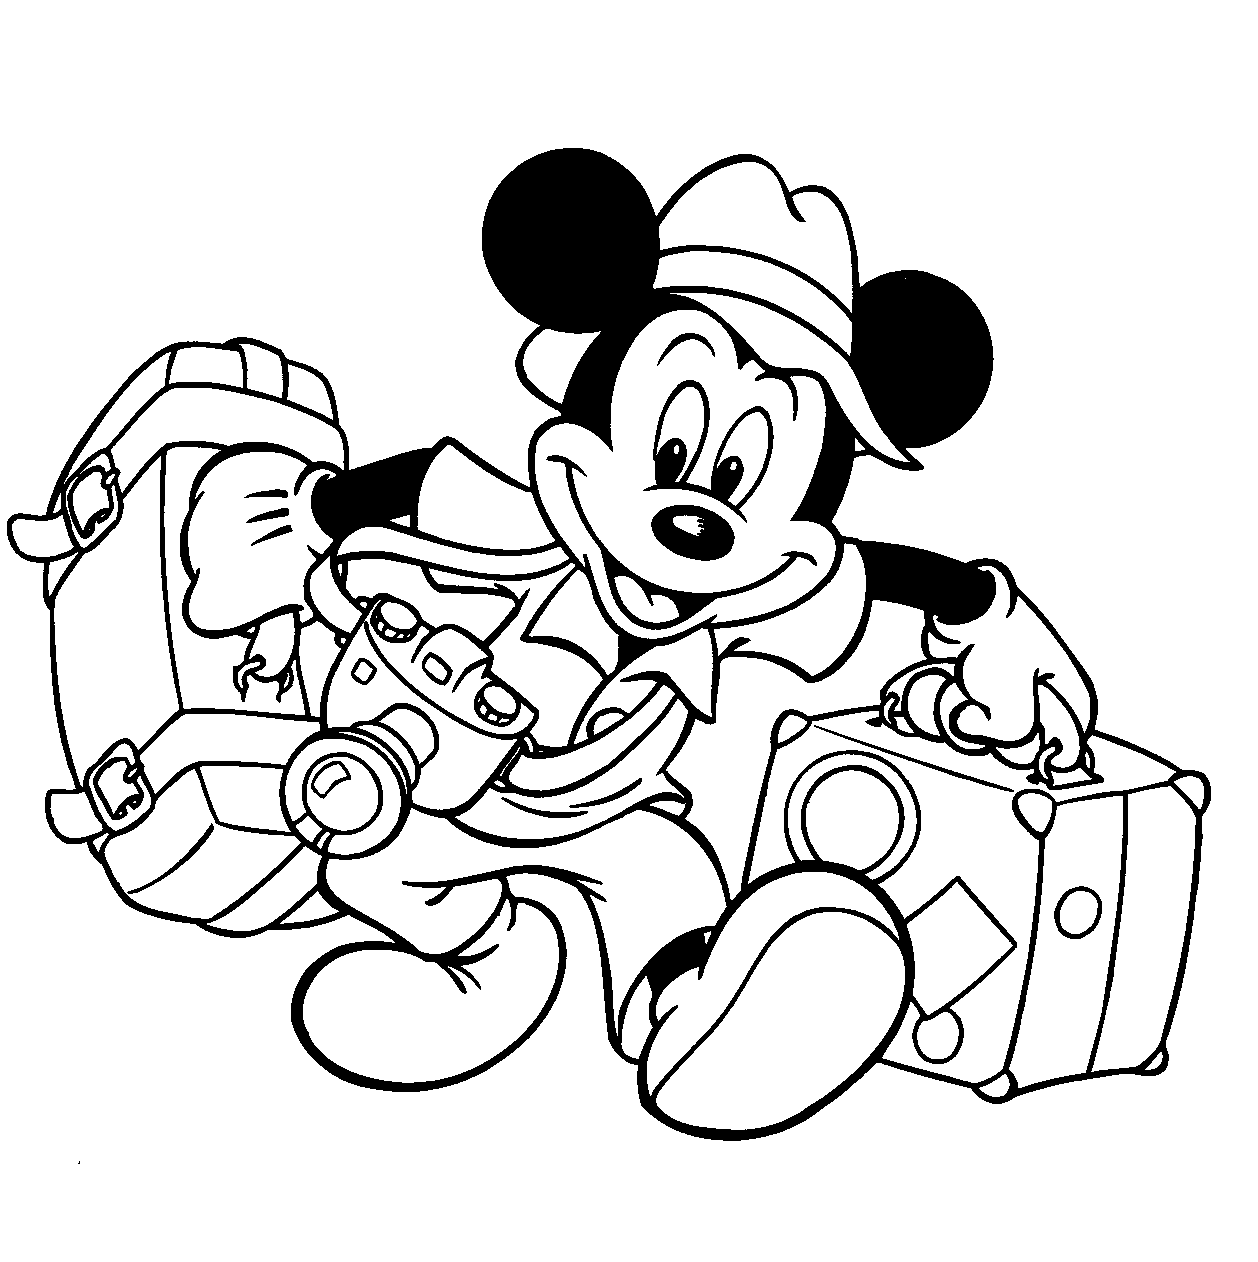 Mickey mouse  black and white mickey mouse clip art free black and white clipartfox 6